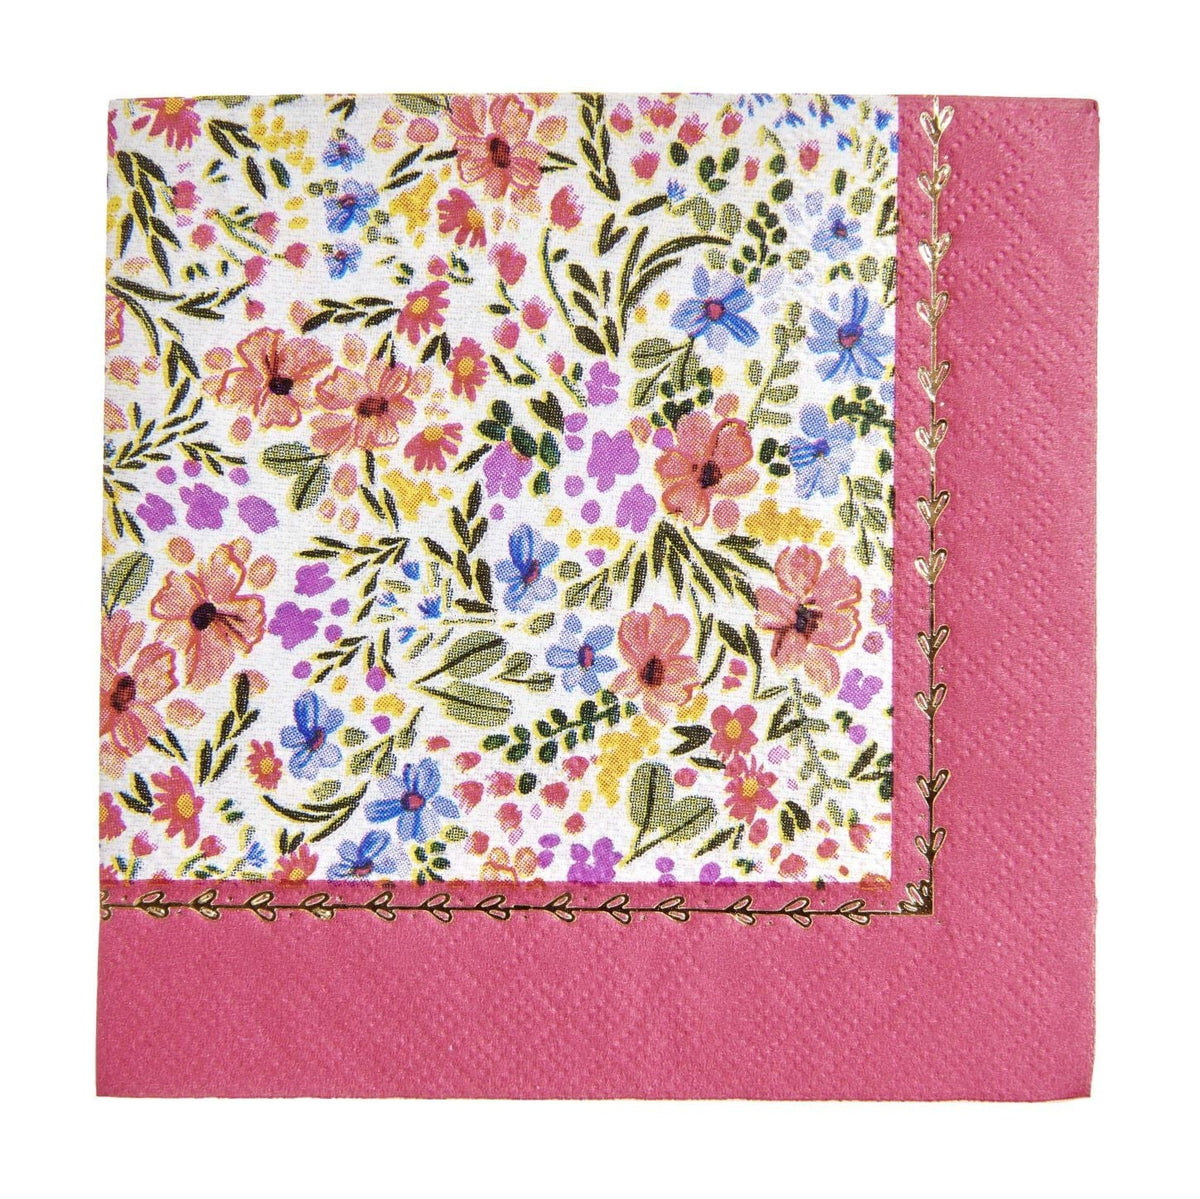 Pink Floral Napkins - 40 Count Roobee Napkins 94775